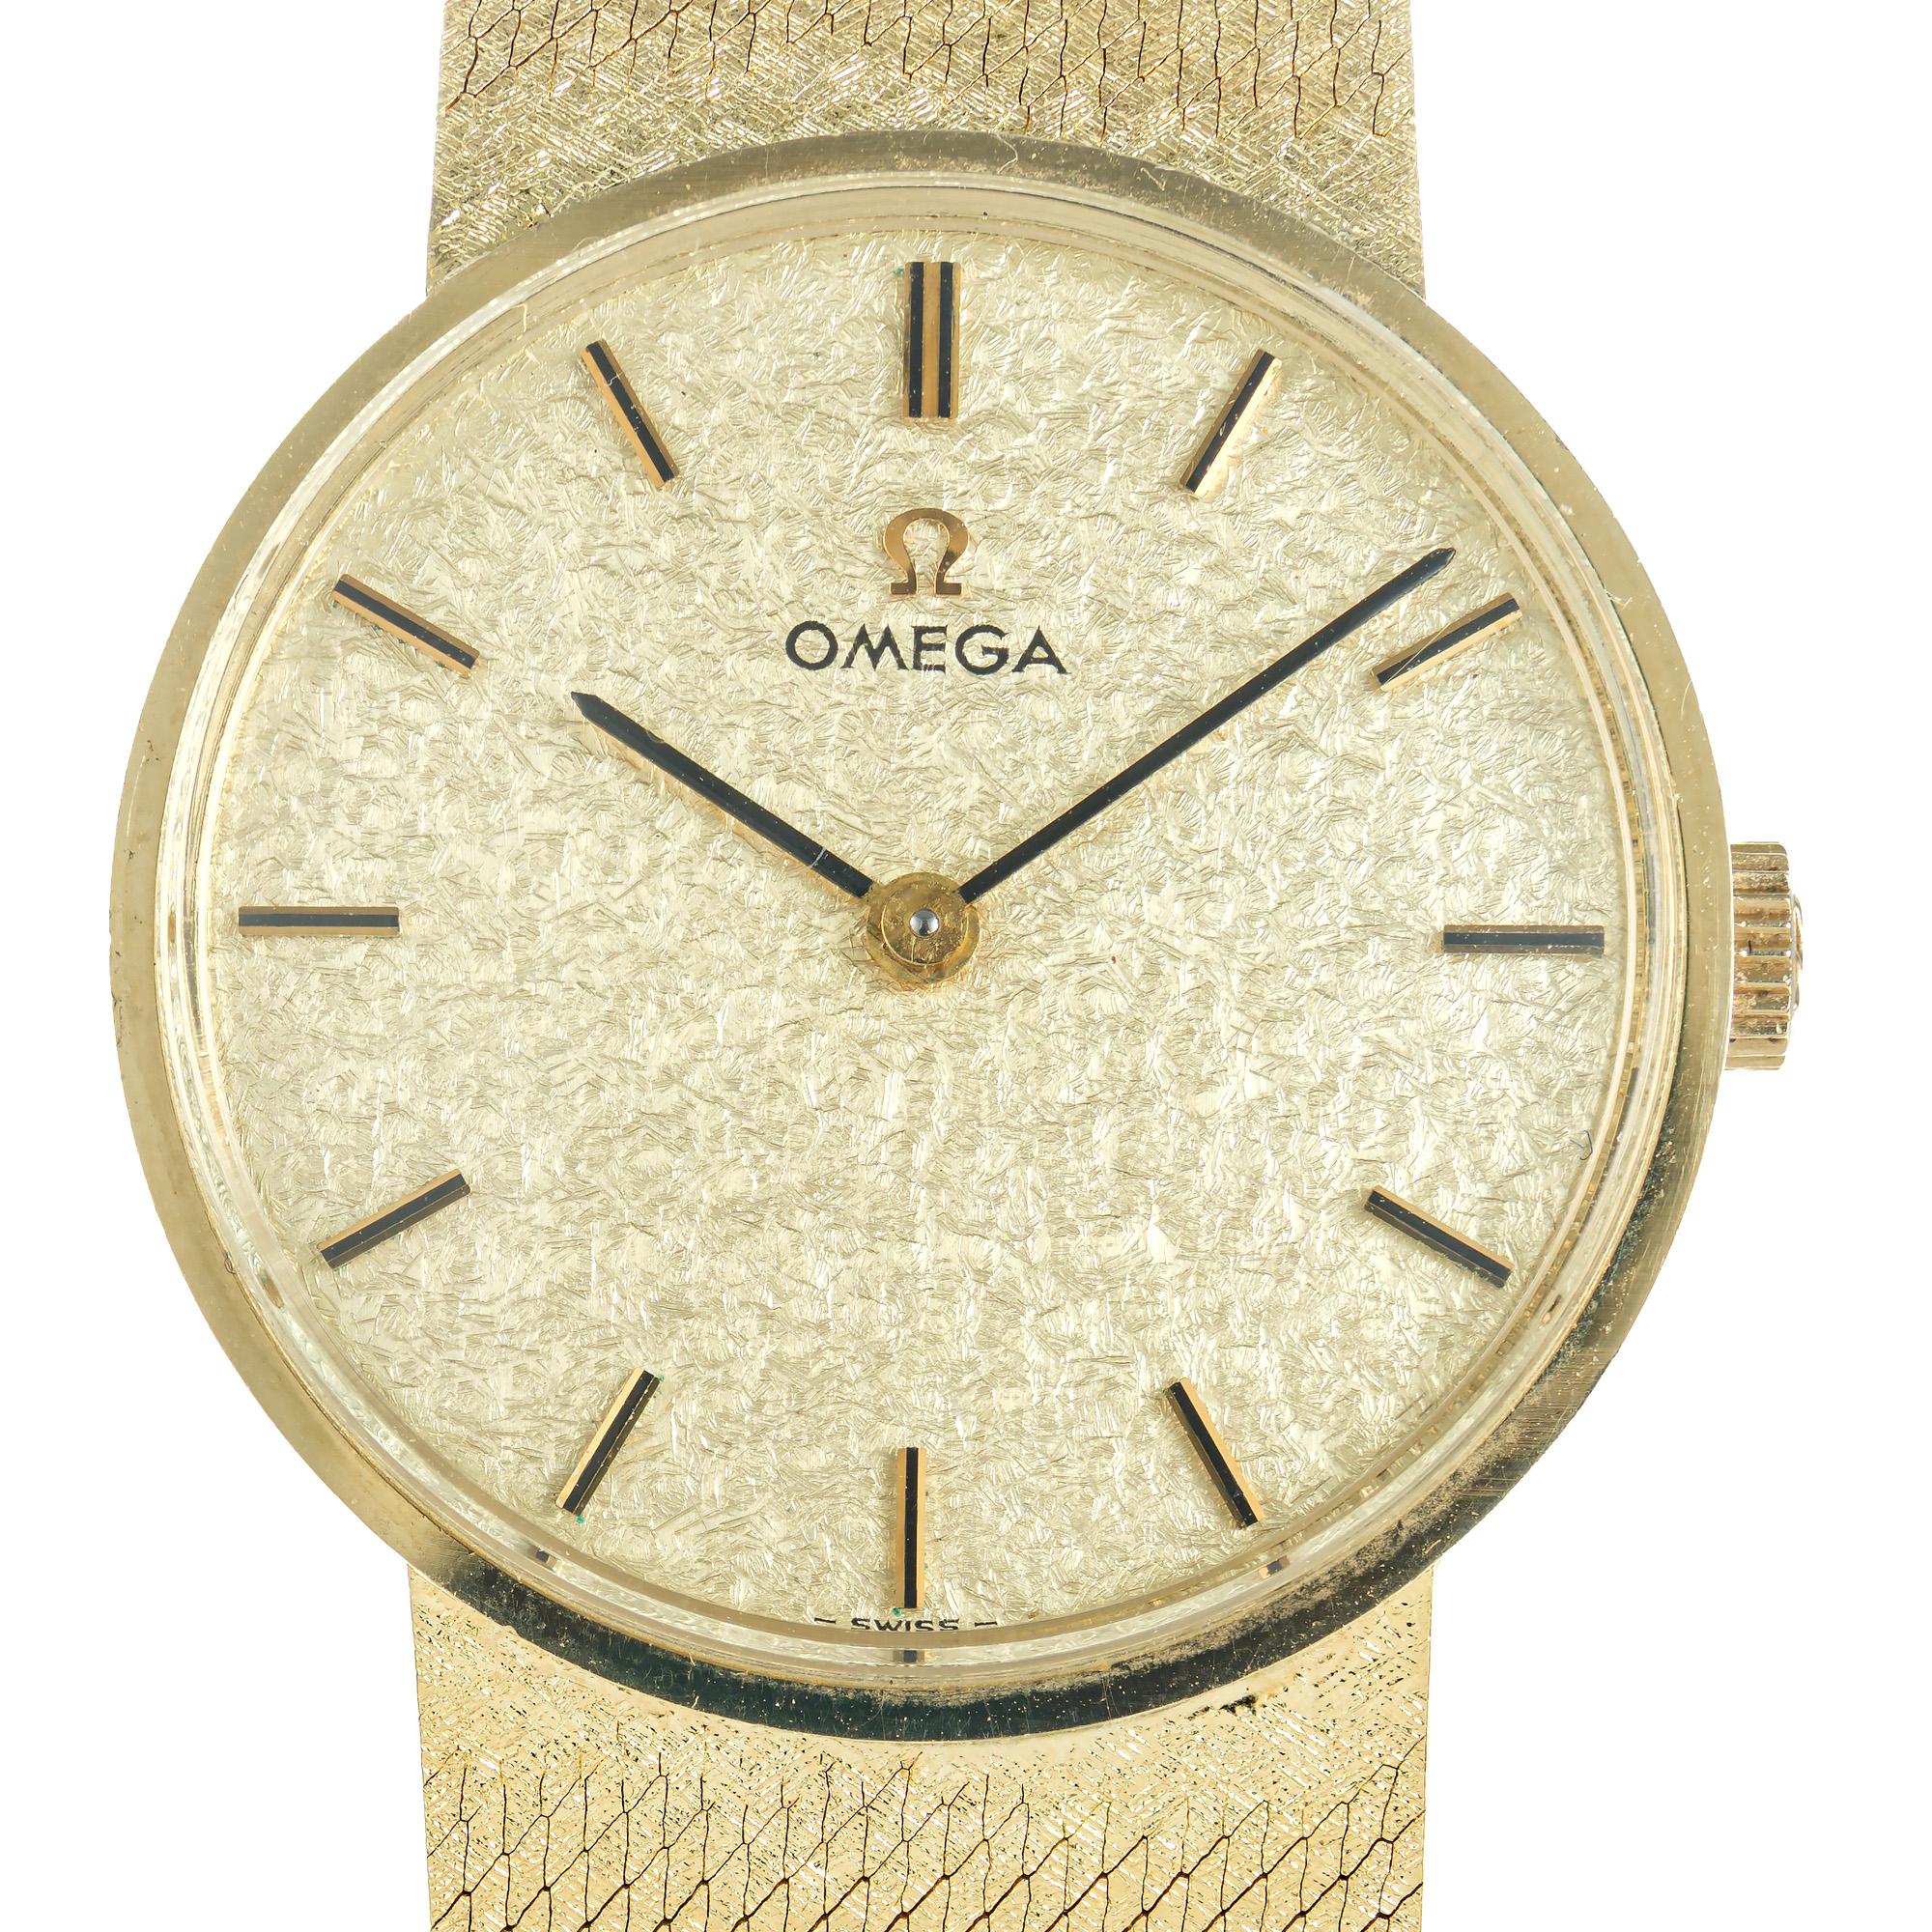 Vintage 1960's unisex Omega wrist watch. Stylish mid-century 14k yellow gold round bezel dress wristwatch complimented by a beautiful 7.25 inch mesh band which matches the dial. Classic 1960's vintage style. 

Length: 28.65mm
Width: 28.51mm
Band